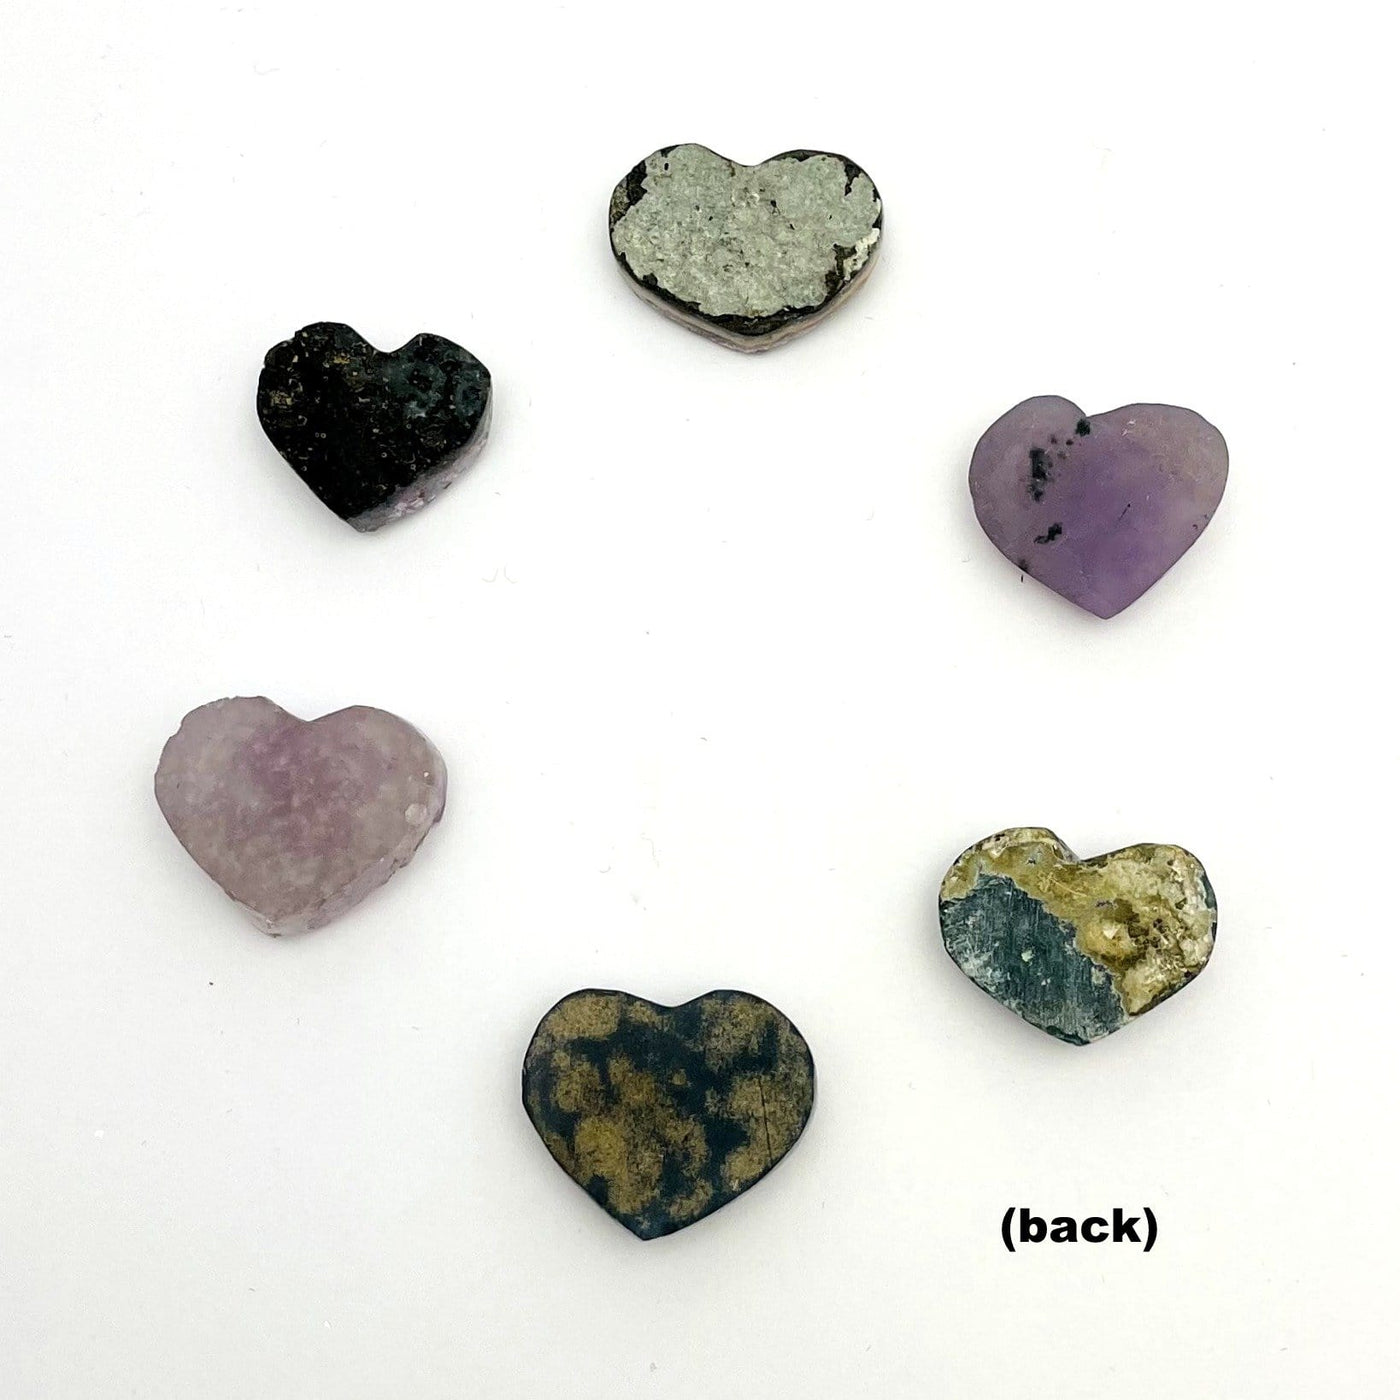 Backside of amethyst hearts showing they are various shades of smoother rock.